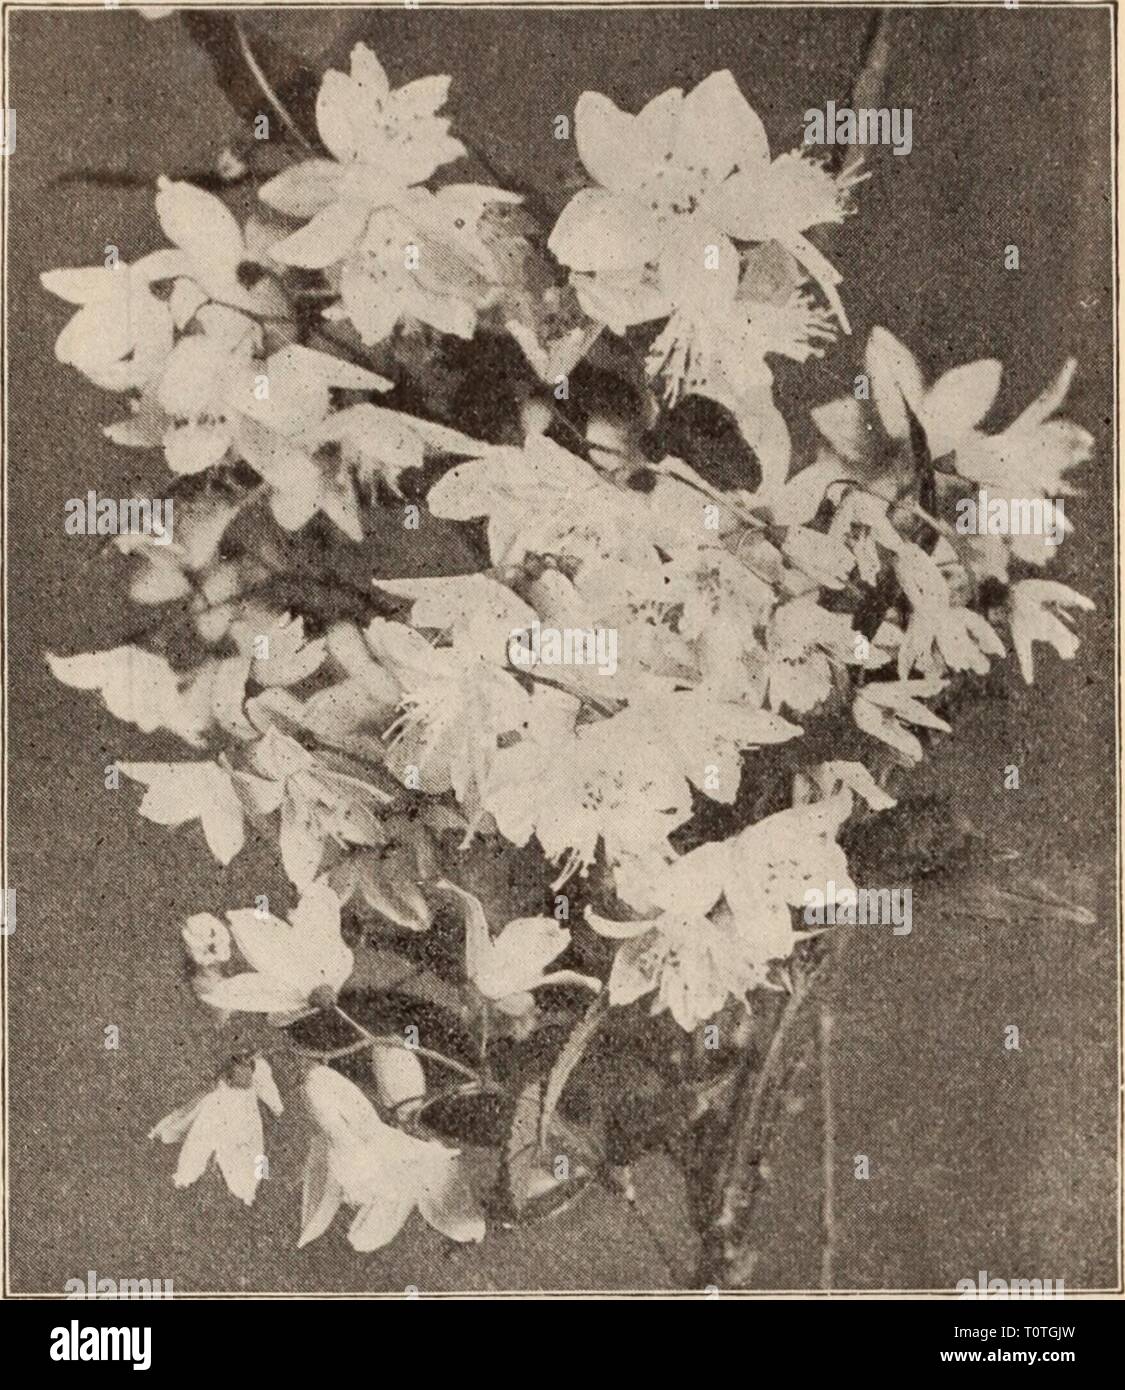 Dreer's wholesale price list  Dreer's wholesale price list / Henry A. Dreer.  dreerswholesalep1912dree Year:   Dreer's Choice Hardy Shrubs m- NOTE All prices Include boxes, packing and delivery to any Express, Freight or Steamboat Line in Philadelphia. =5*    DEUTZIA LEMOINEI Inches high Doz. Per 100 Abella'€hinensis Grandiflora pot grown $2 00 $15 00 Altheal Alba Plena 36 1 75 12 00 Coerulea Plena 36 1 75 12 00 Duchesse de Brabant 36 1 75 12 00 Jeanne D'Arc . . . • 36 1 75 12 00 Lady Stanley 36 1 75 12 00 Purpurea Folia Variegata 24 1 75 12 00 Rubis 36 1 75 12 00 Totus Albus 24 1 75 12 00 Amo Stock Photo